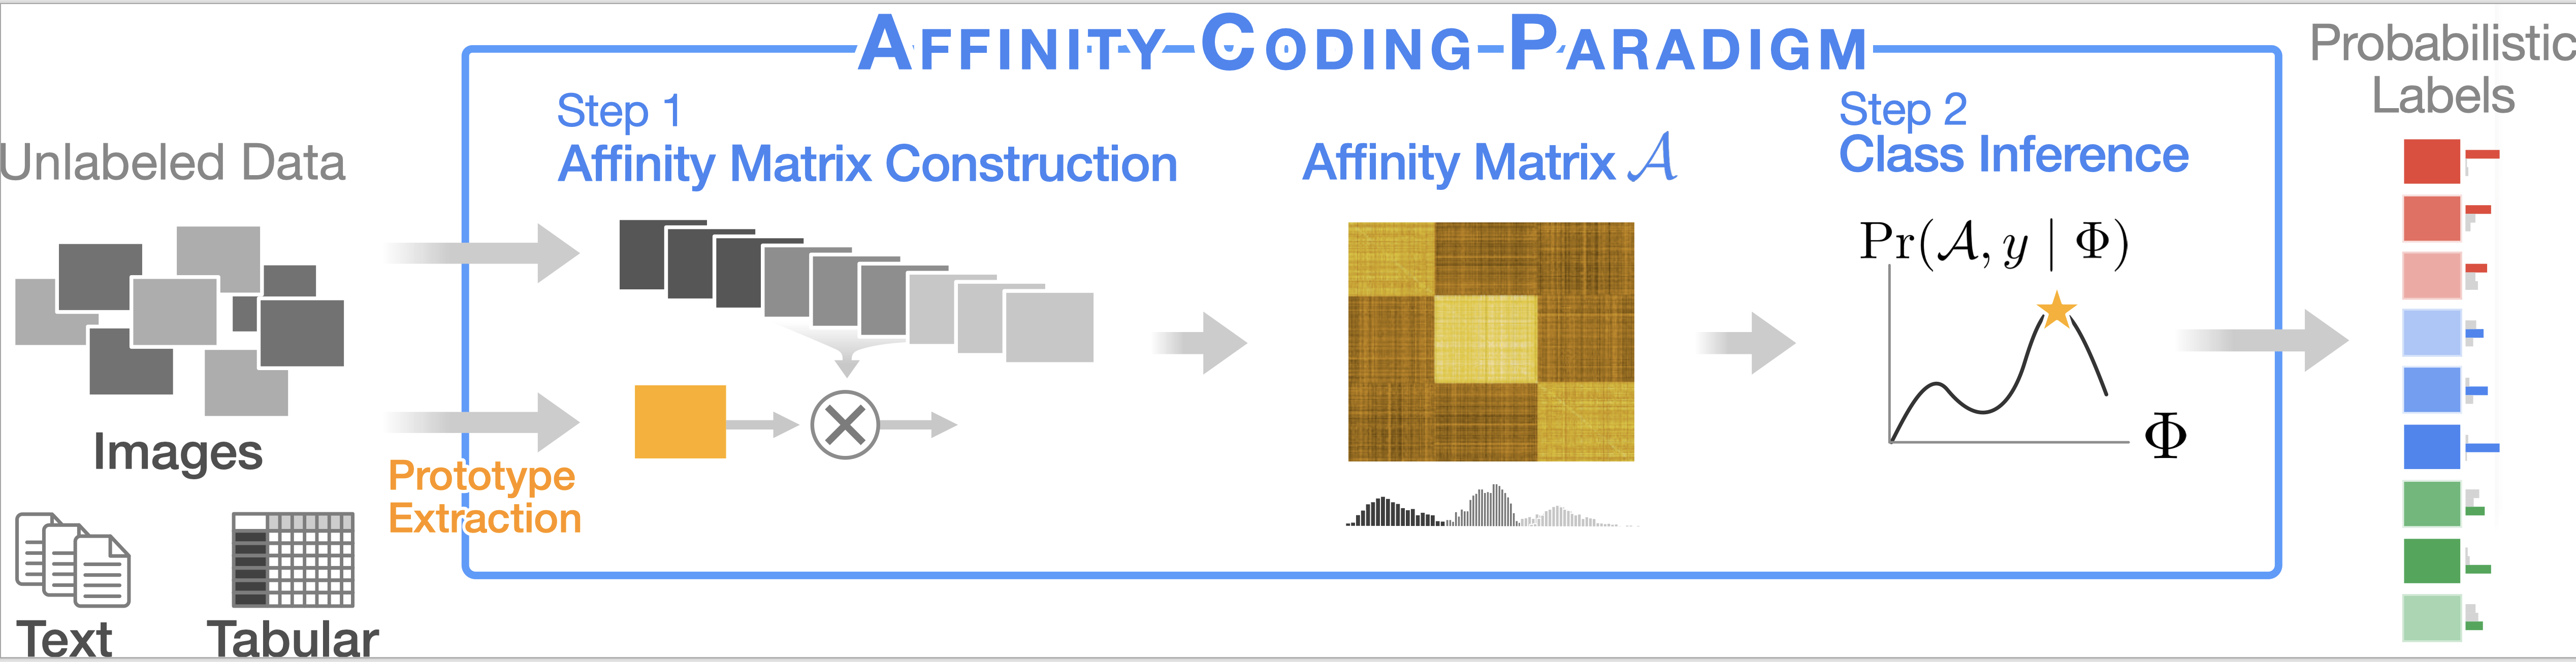 GOGGLES: Automatic Image Labeling with Affinity Coding